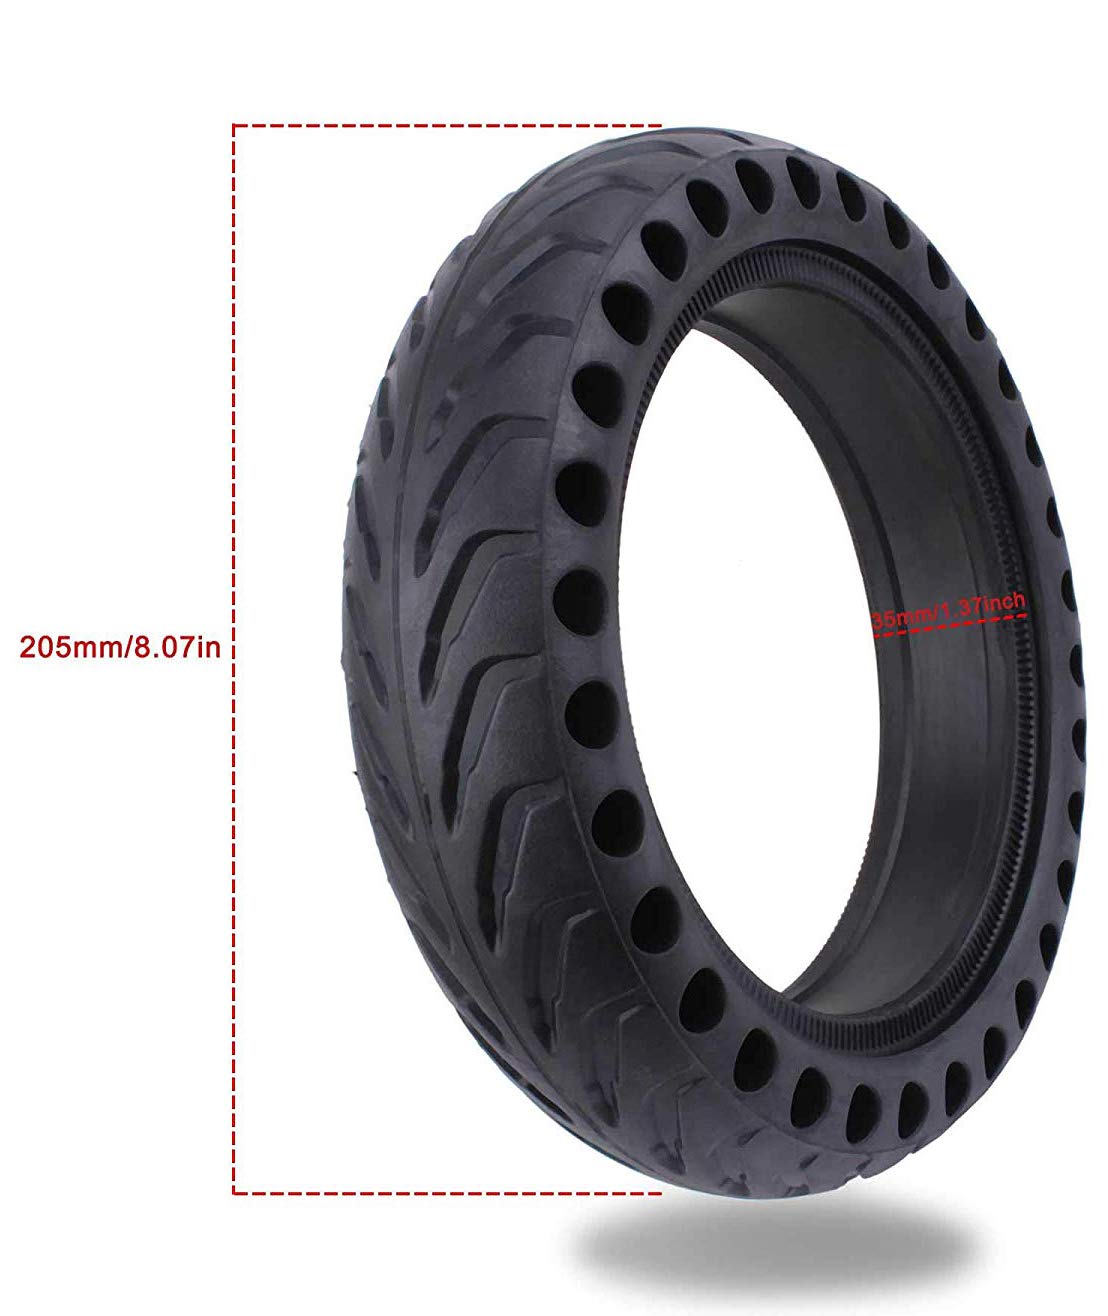 GLDYTIMES 8.5 Inch Tire, Honeycomb Polyurethane Rubber Tire Wheel Explosion-Proof Comfortable and Durable Tire for Xiaomi Mi Mijia M365 (Set of 2)